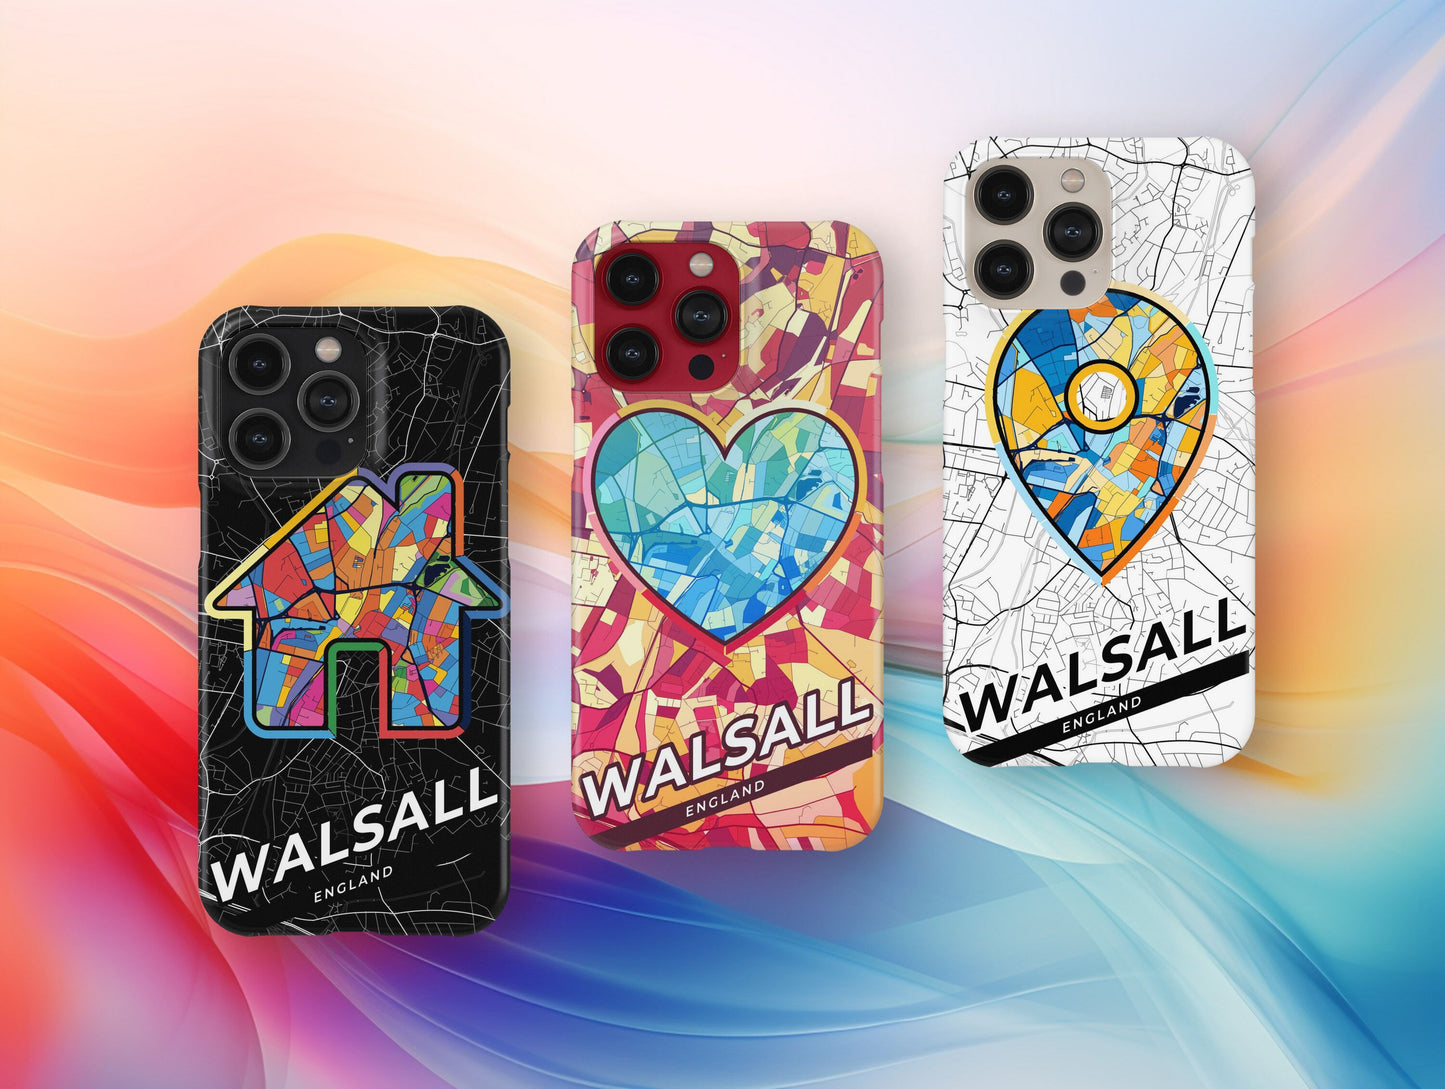 Walsall England slim phone case with colorful icon